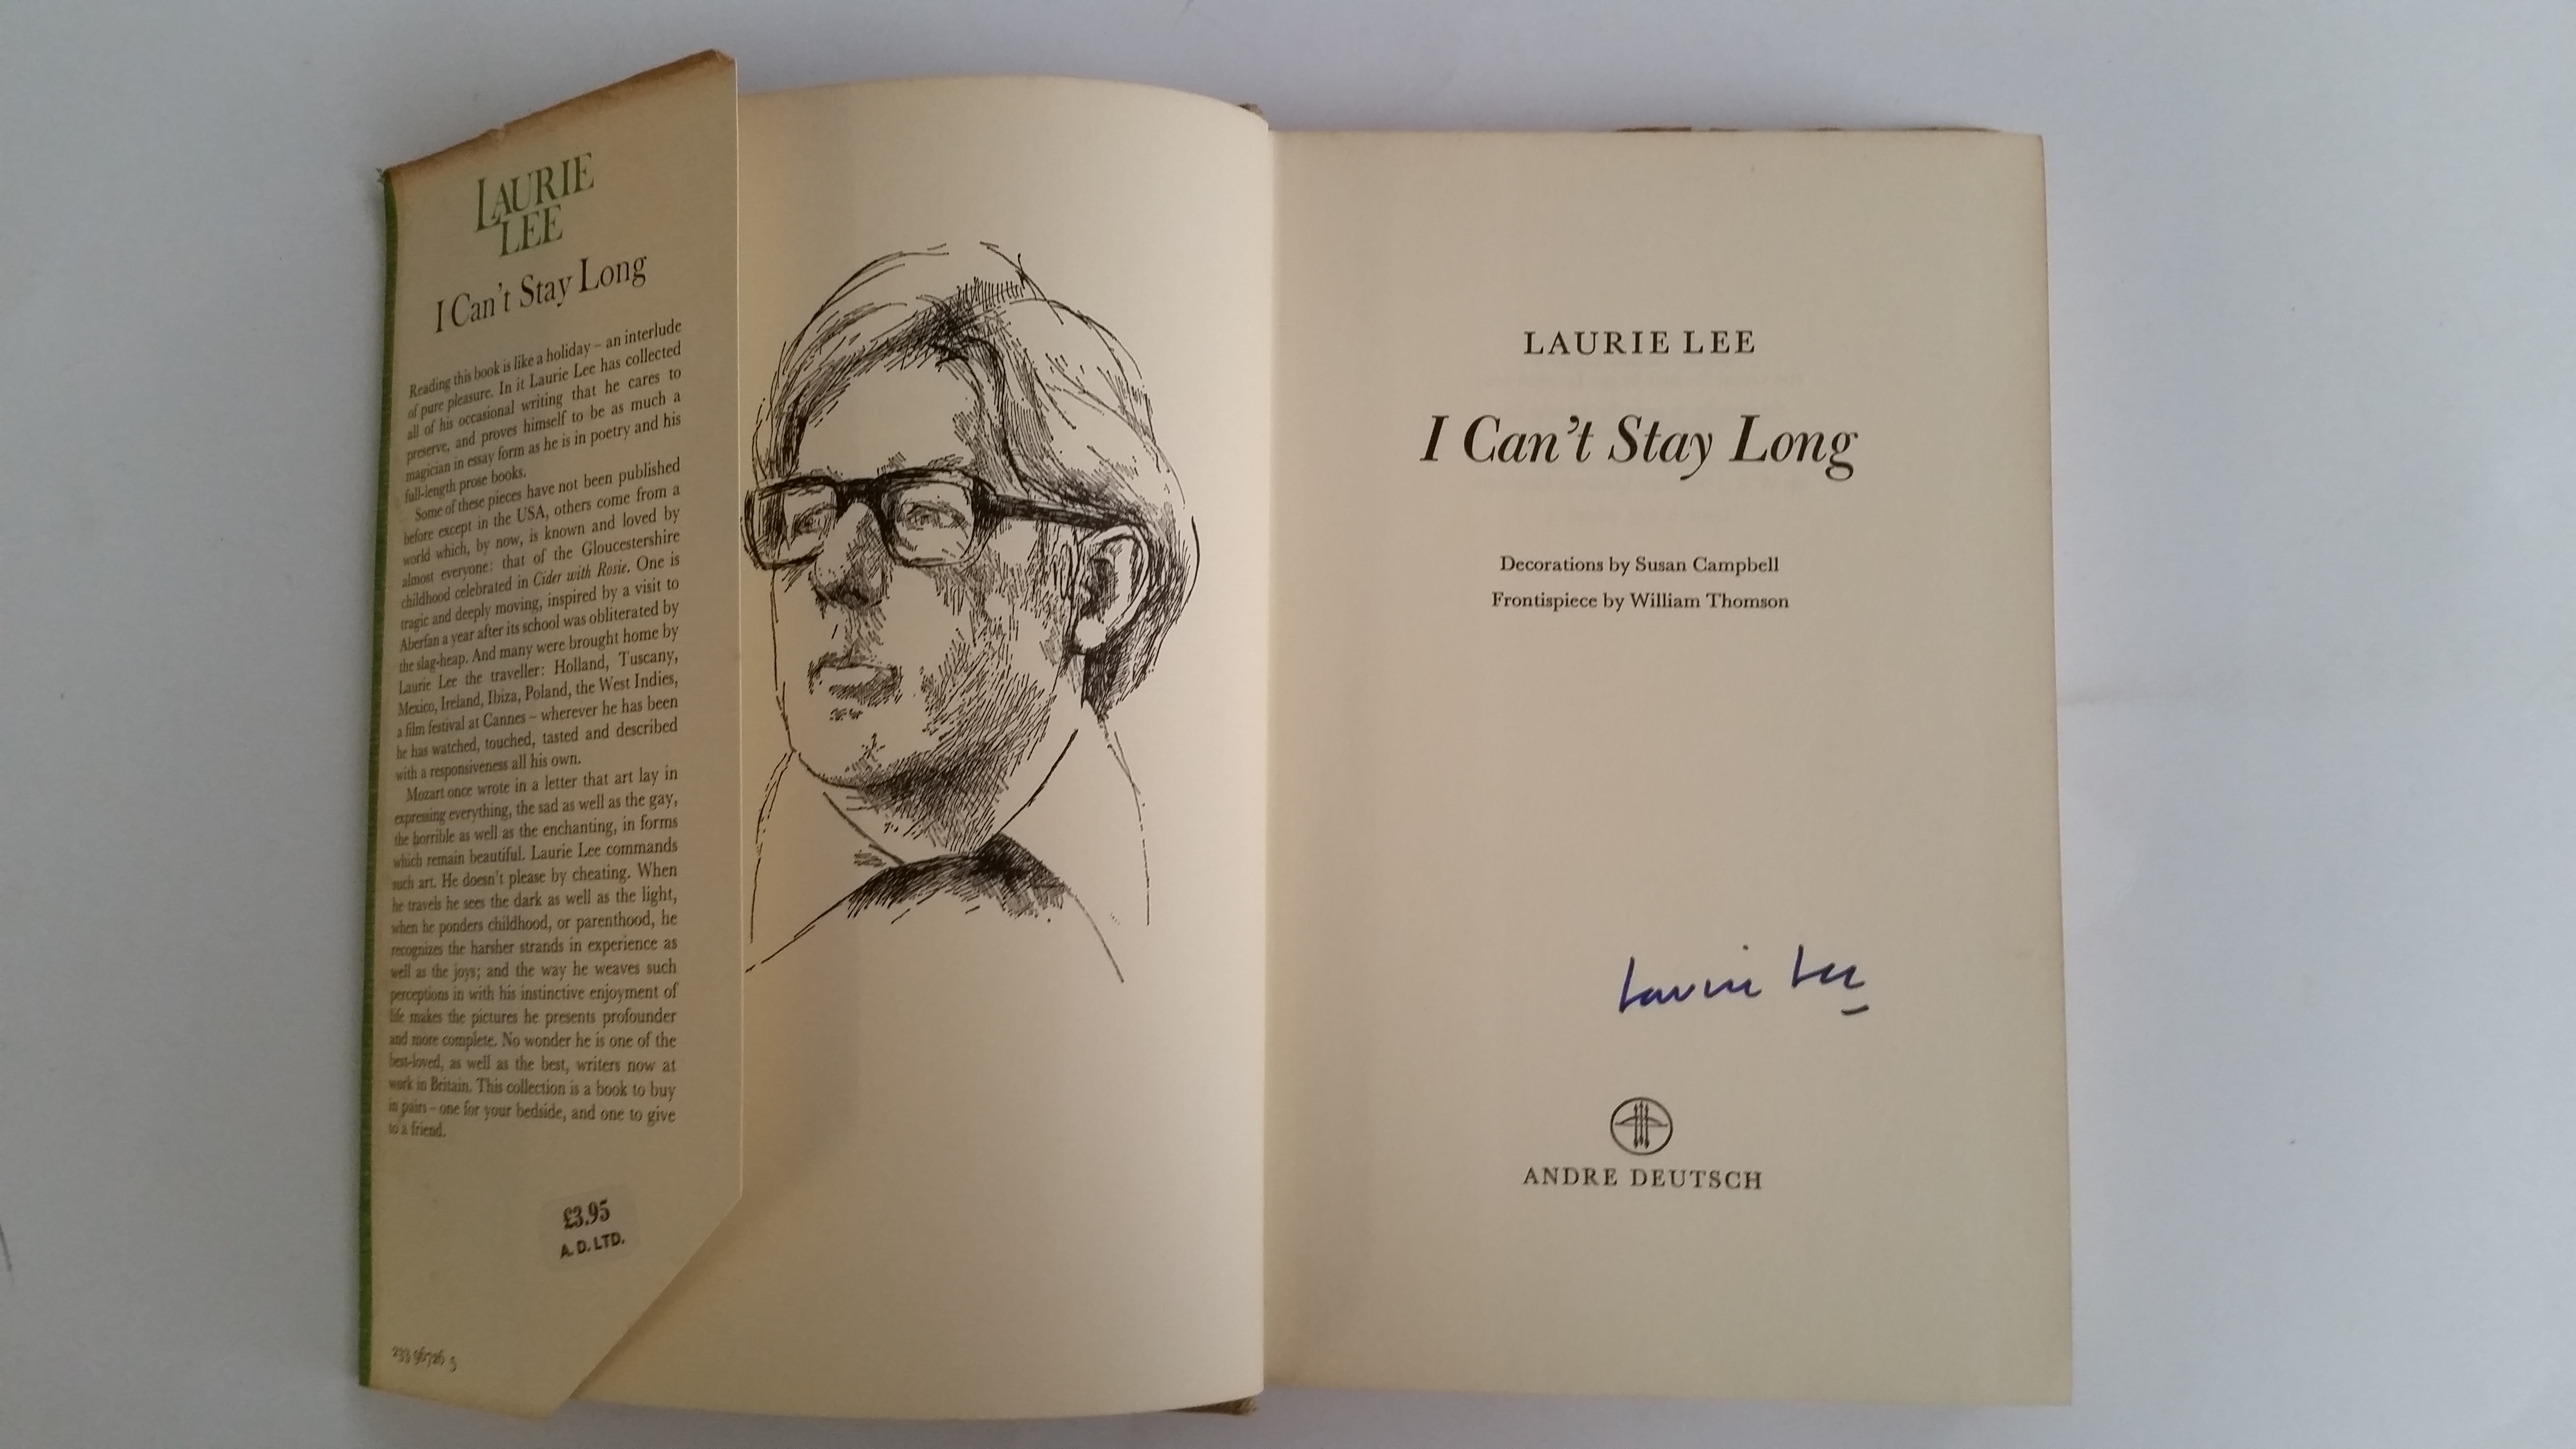 LITERATURE, signed hardback edition by Laurie Lee, I Can't Stay Long, to title page, first